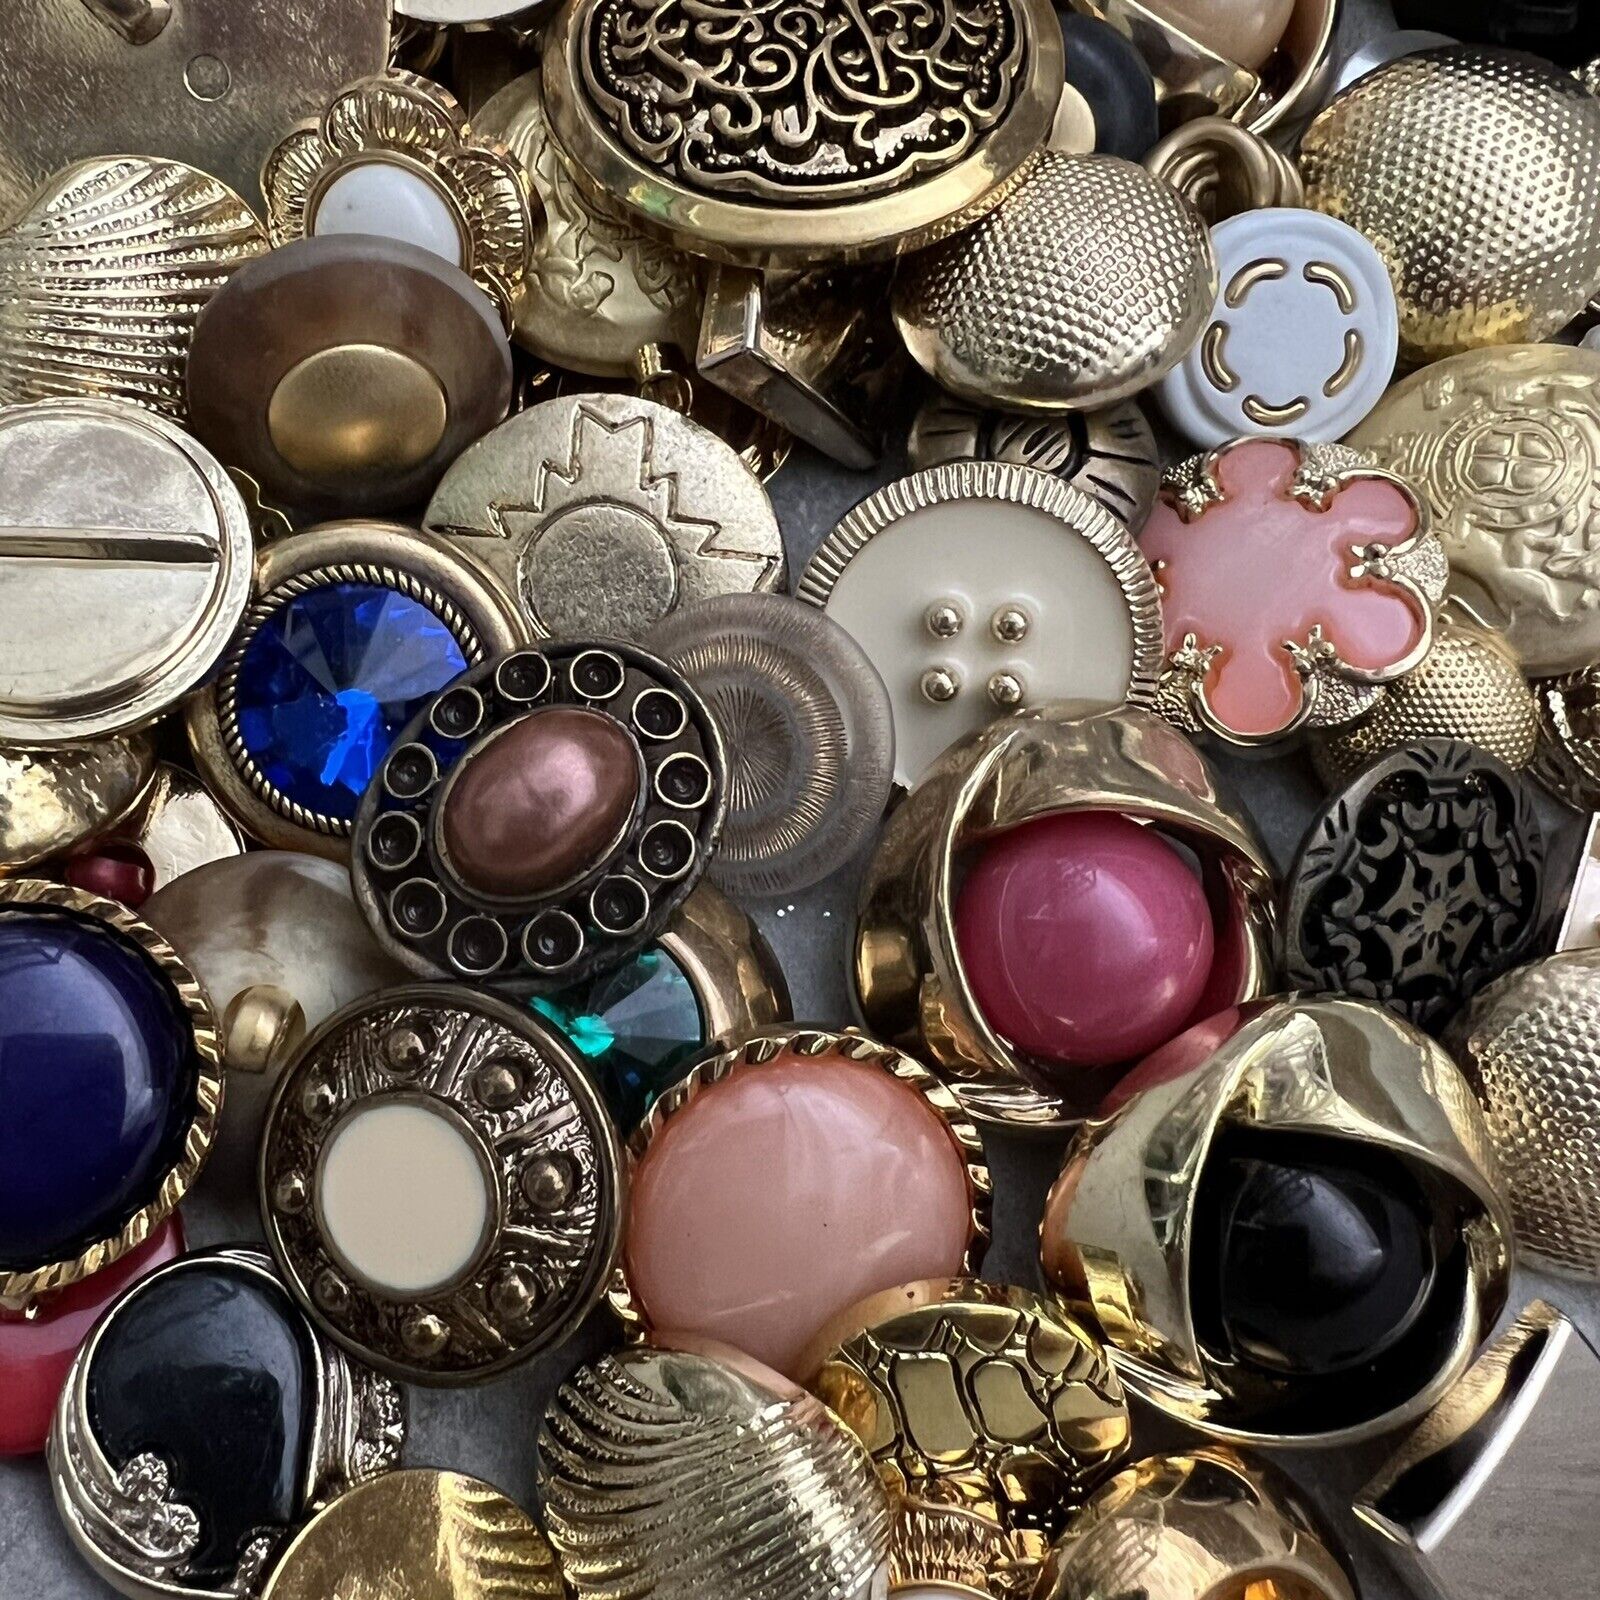 VIP Premium  MIXED LOT All Kinds Of GOLD & ANTIQUE GOLD Buttons All Sizes